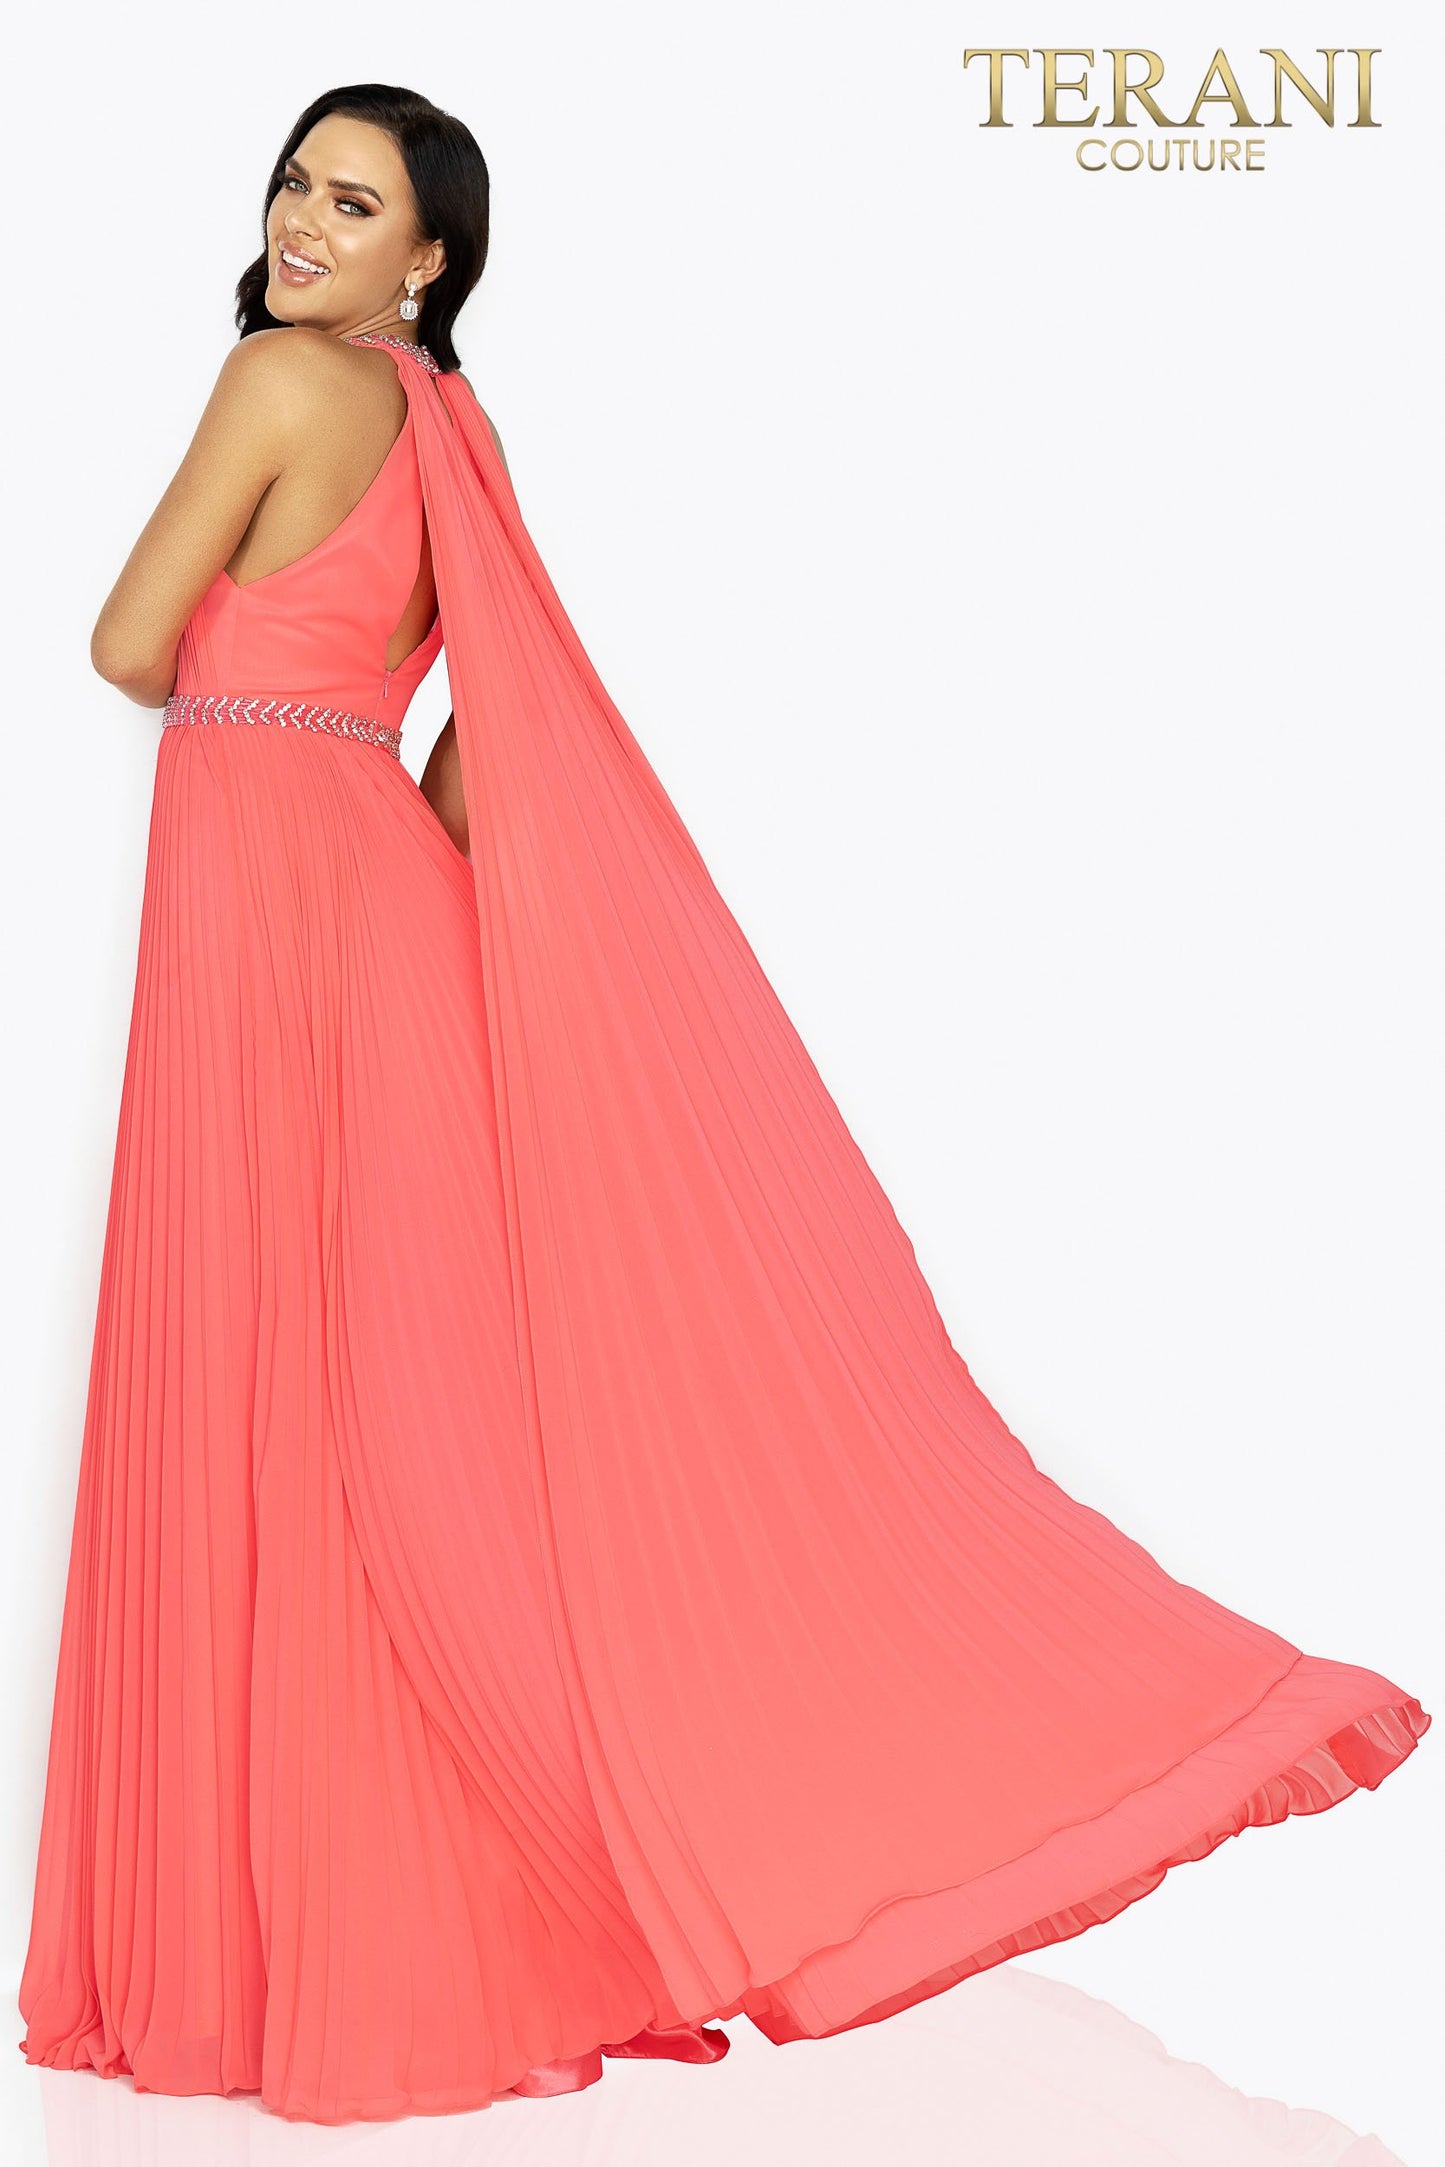 Flowing Chiffon Halter Neck Prom Dress With High Slit